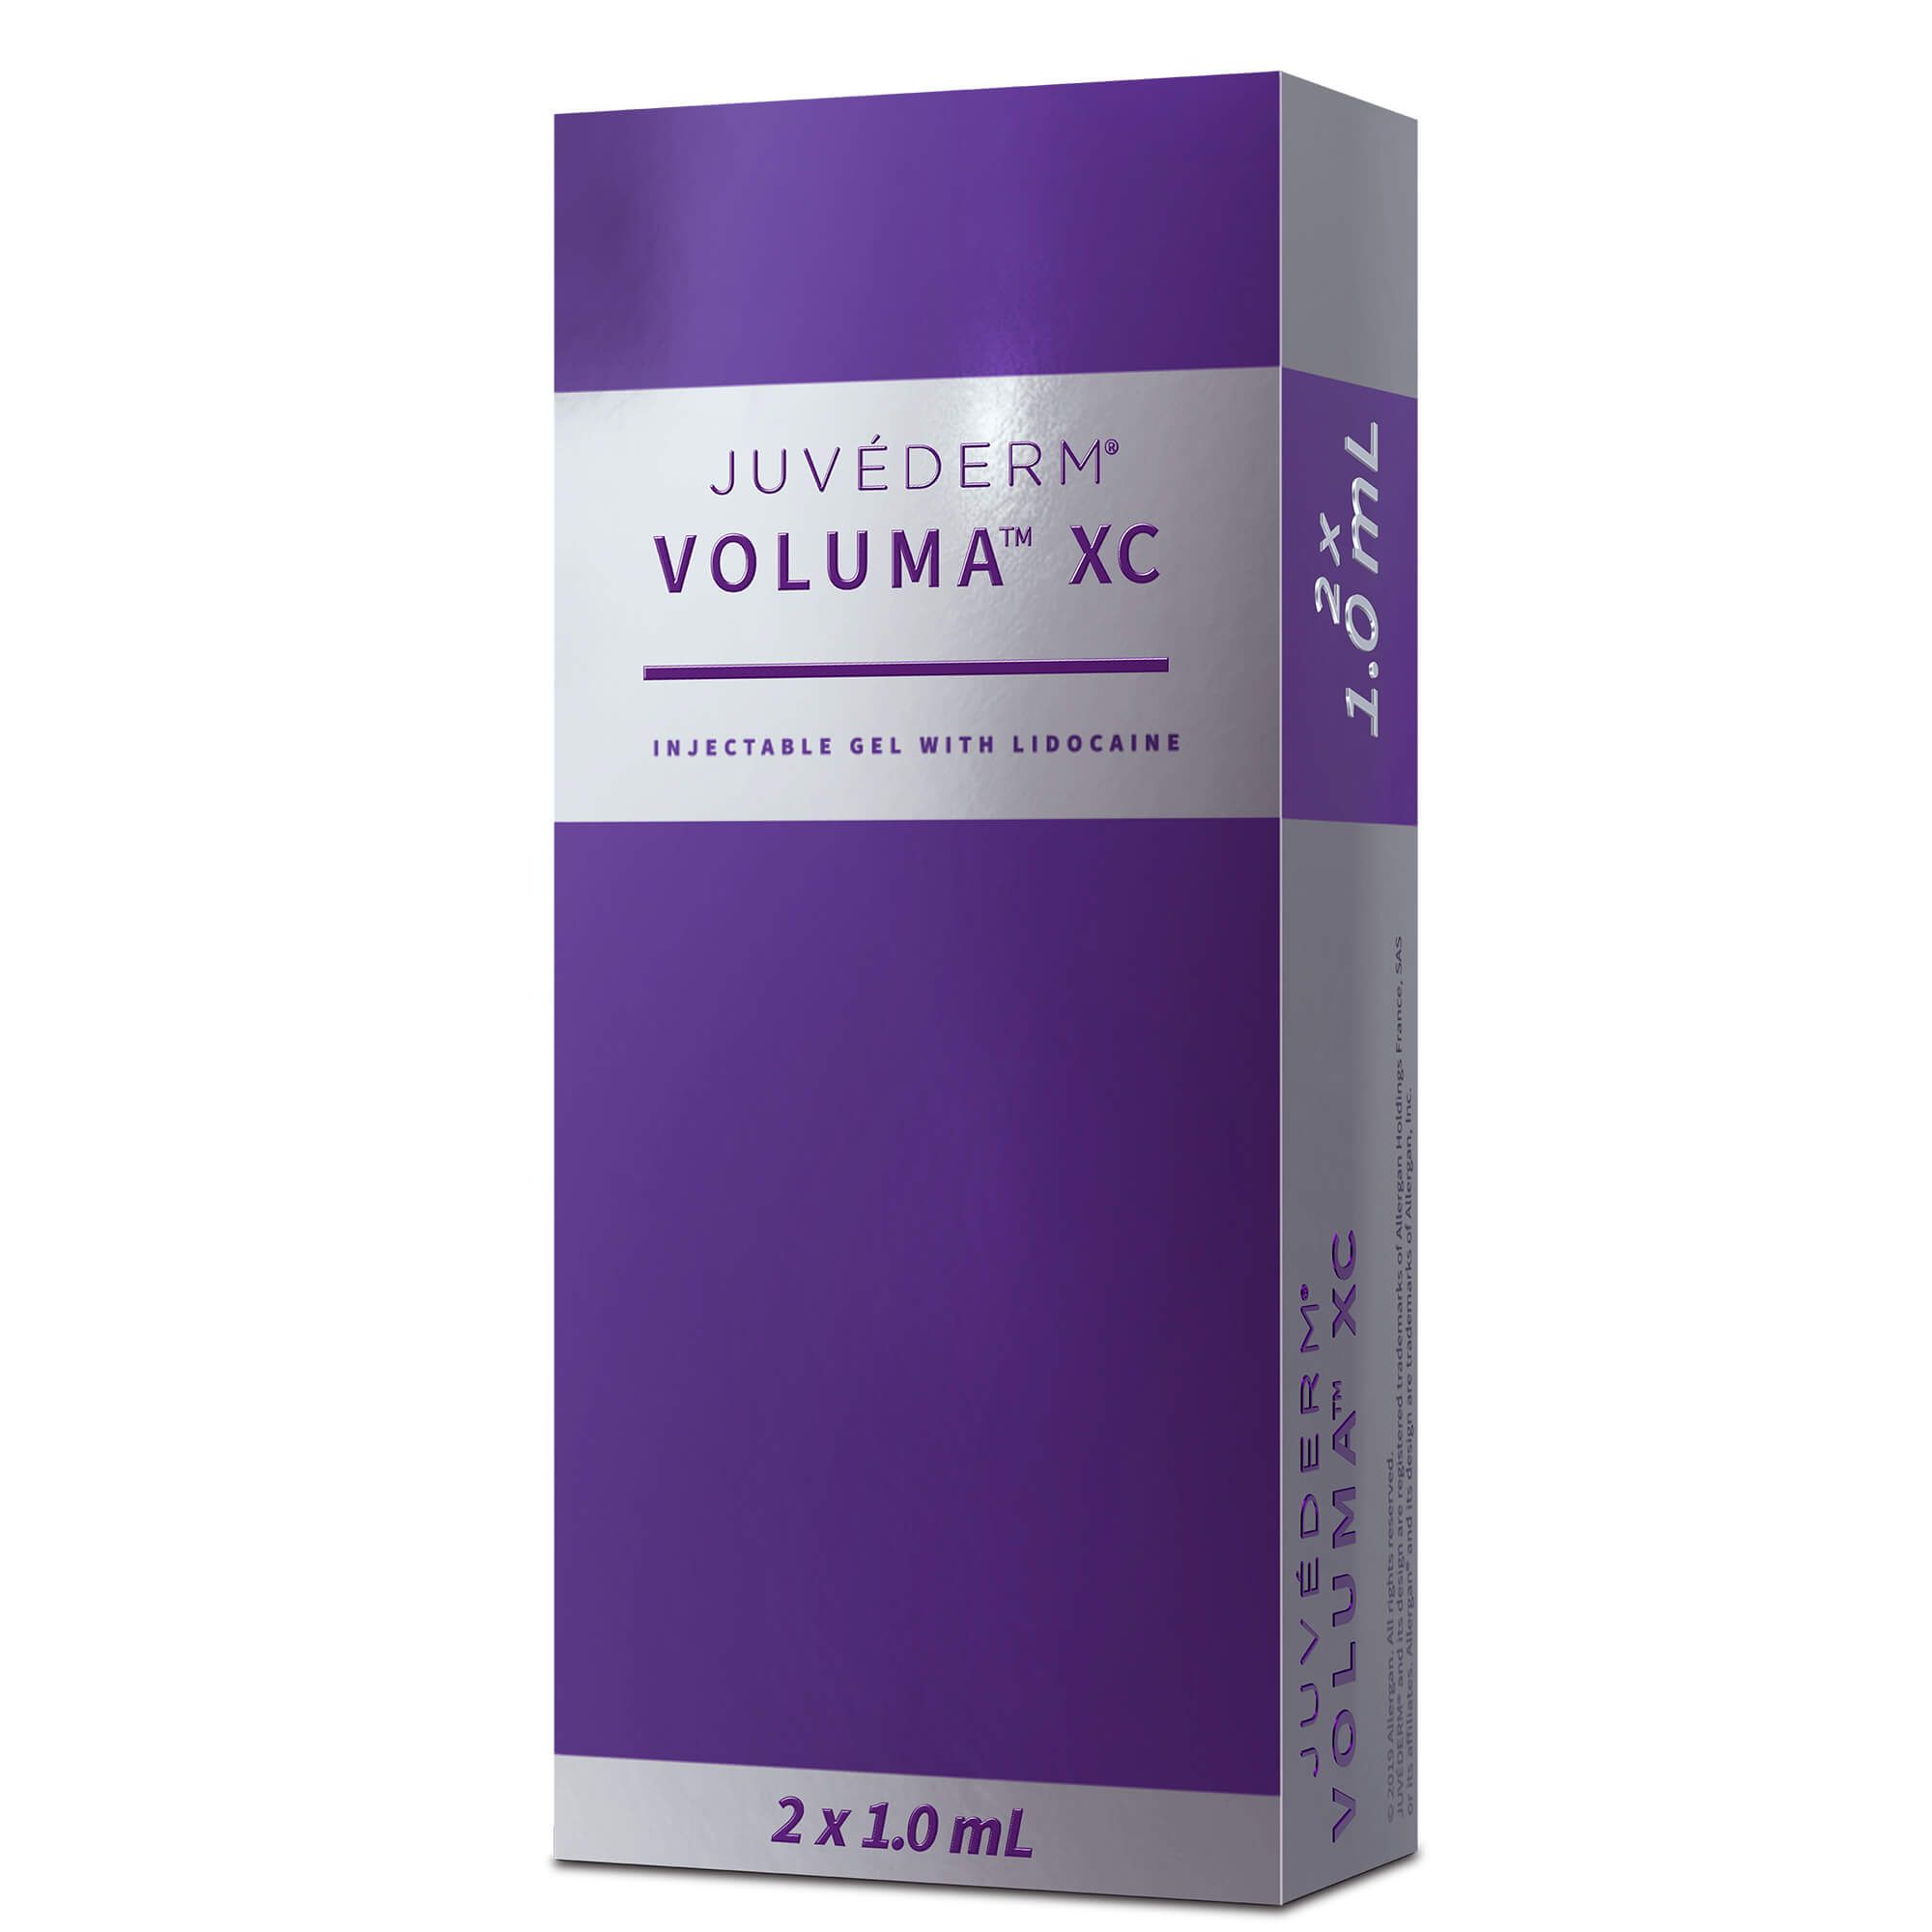 Juvederm product